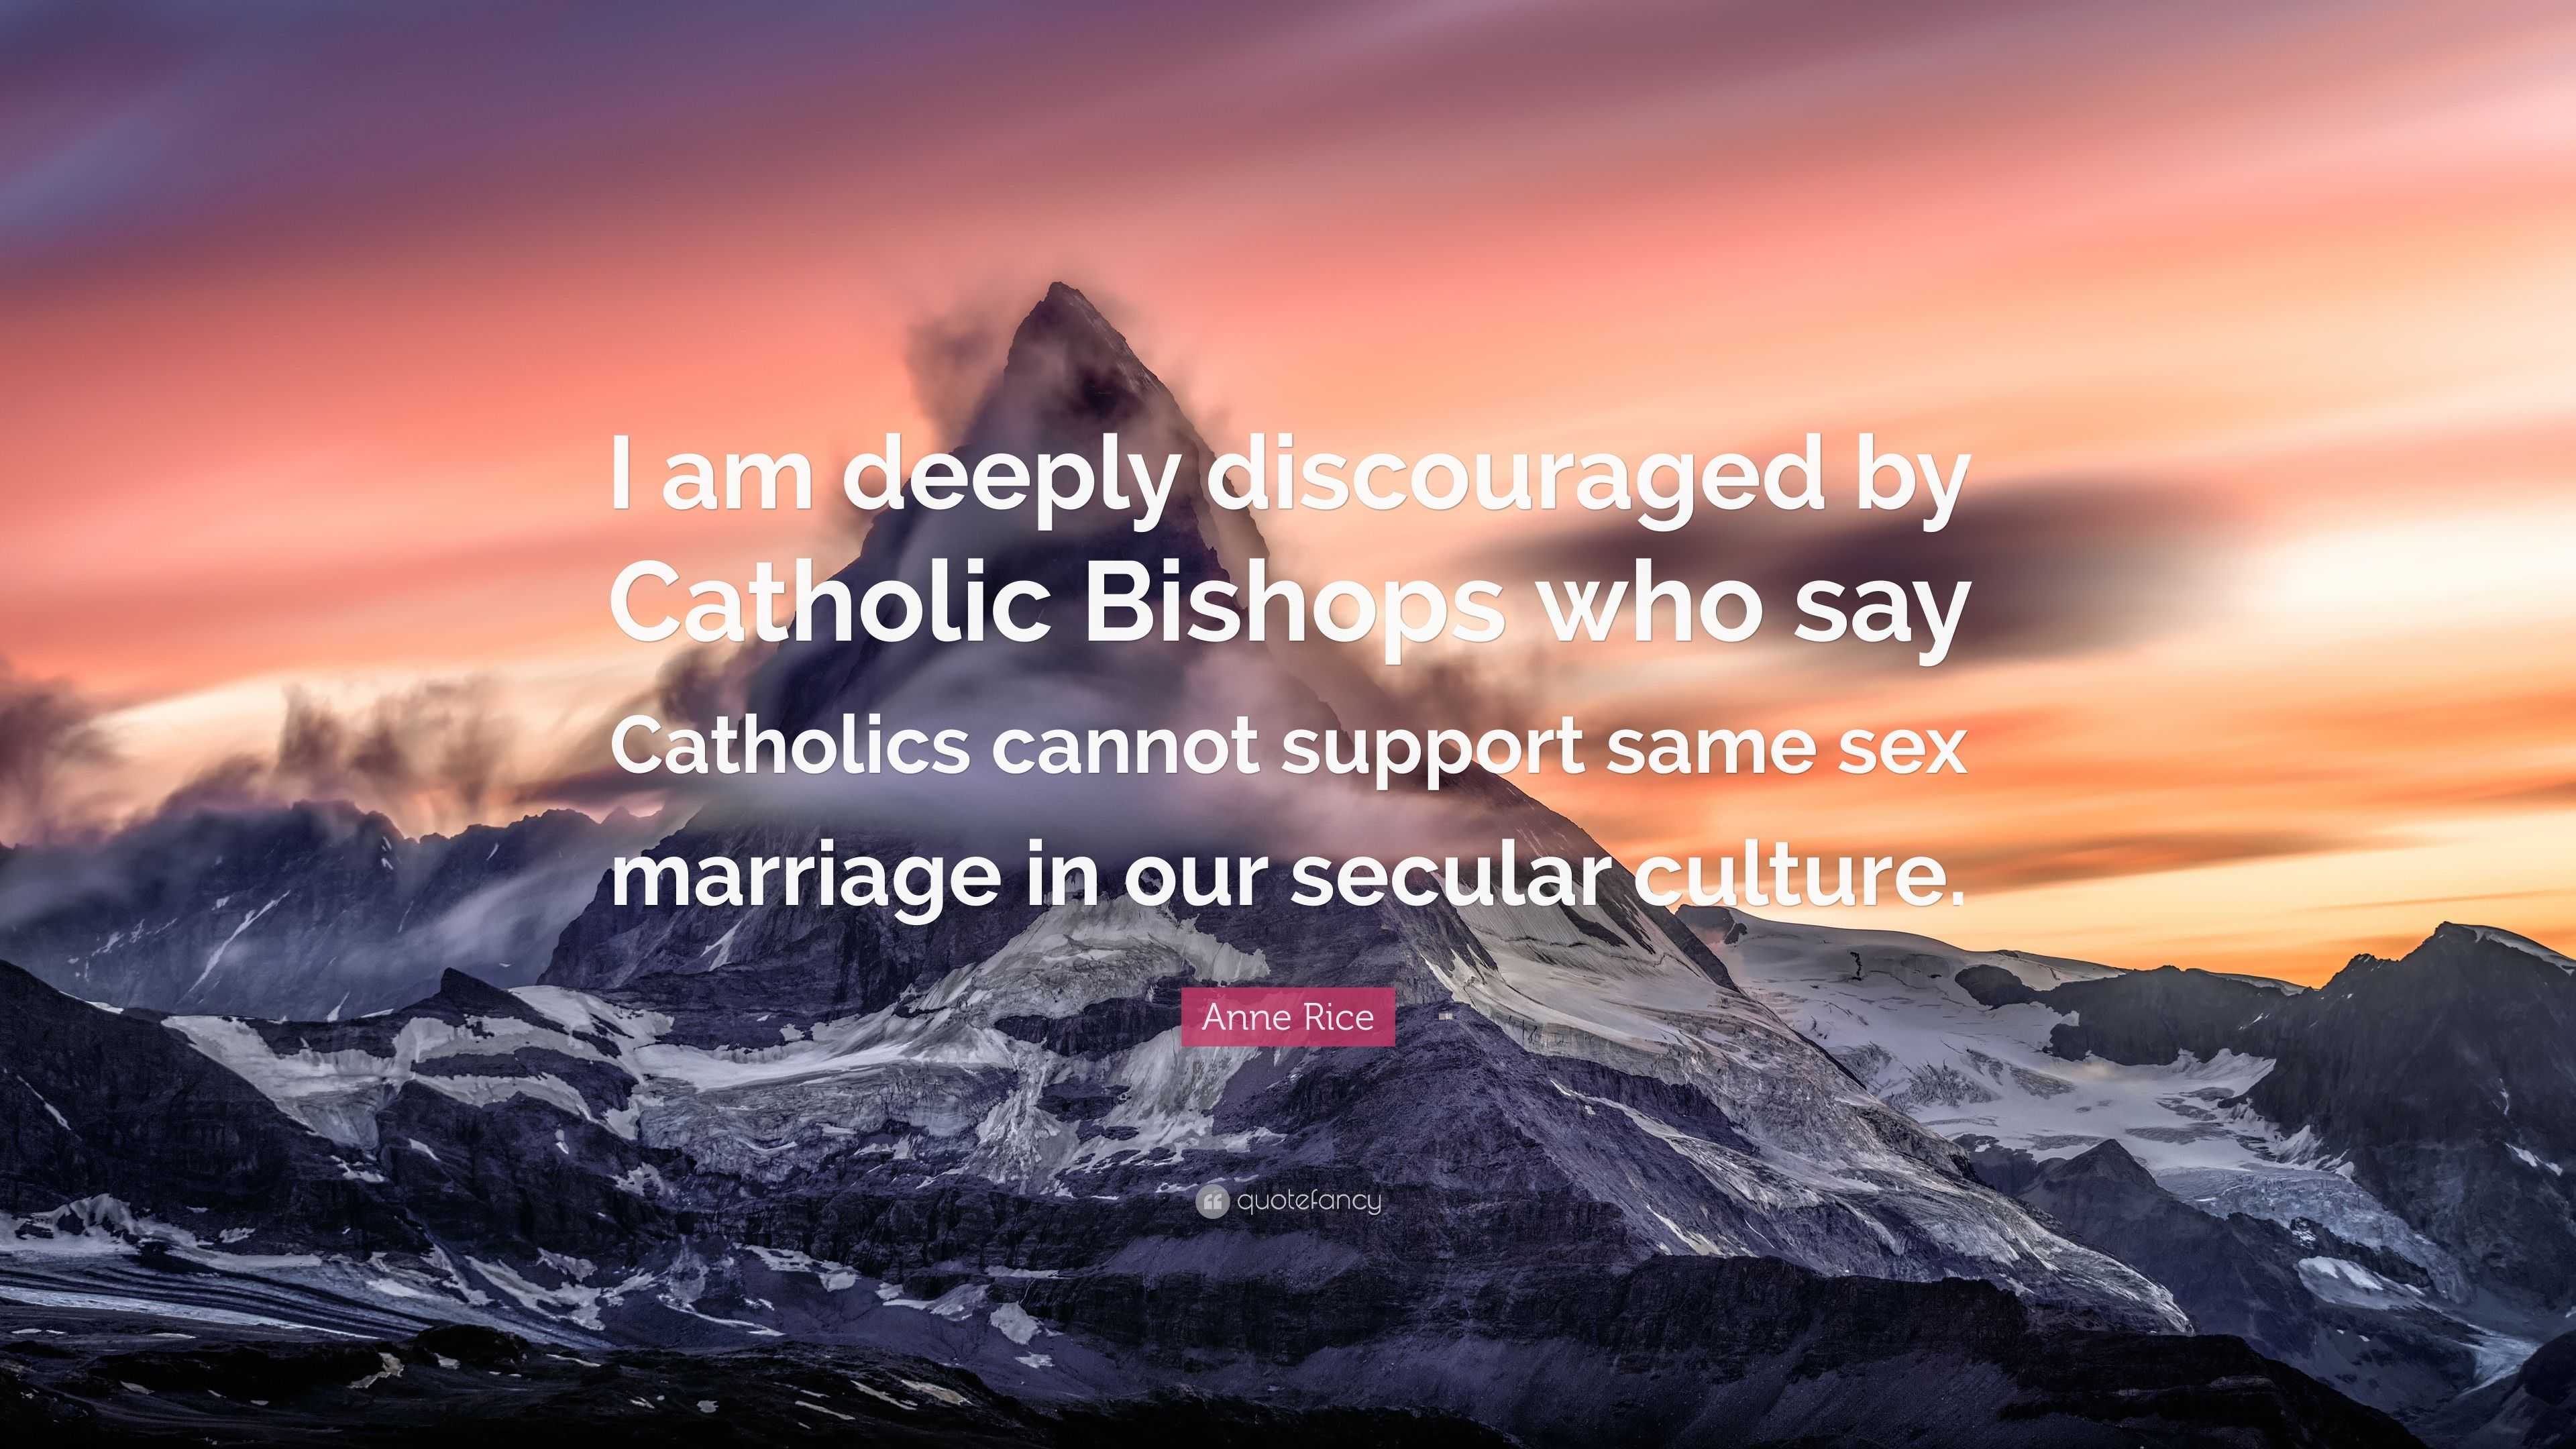 Anne Rice Quote I Am Deeply Discouraged By Catholic Bishops Who Say Catholics Cannot Support Same